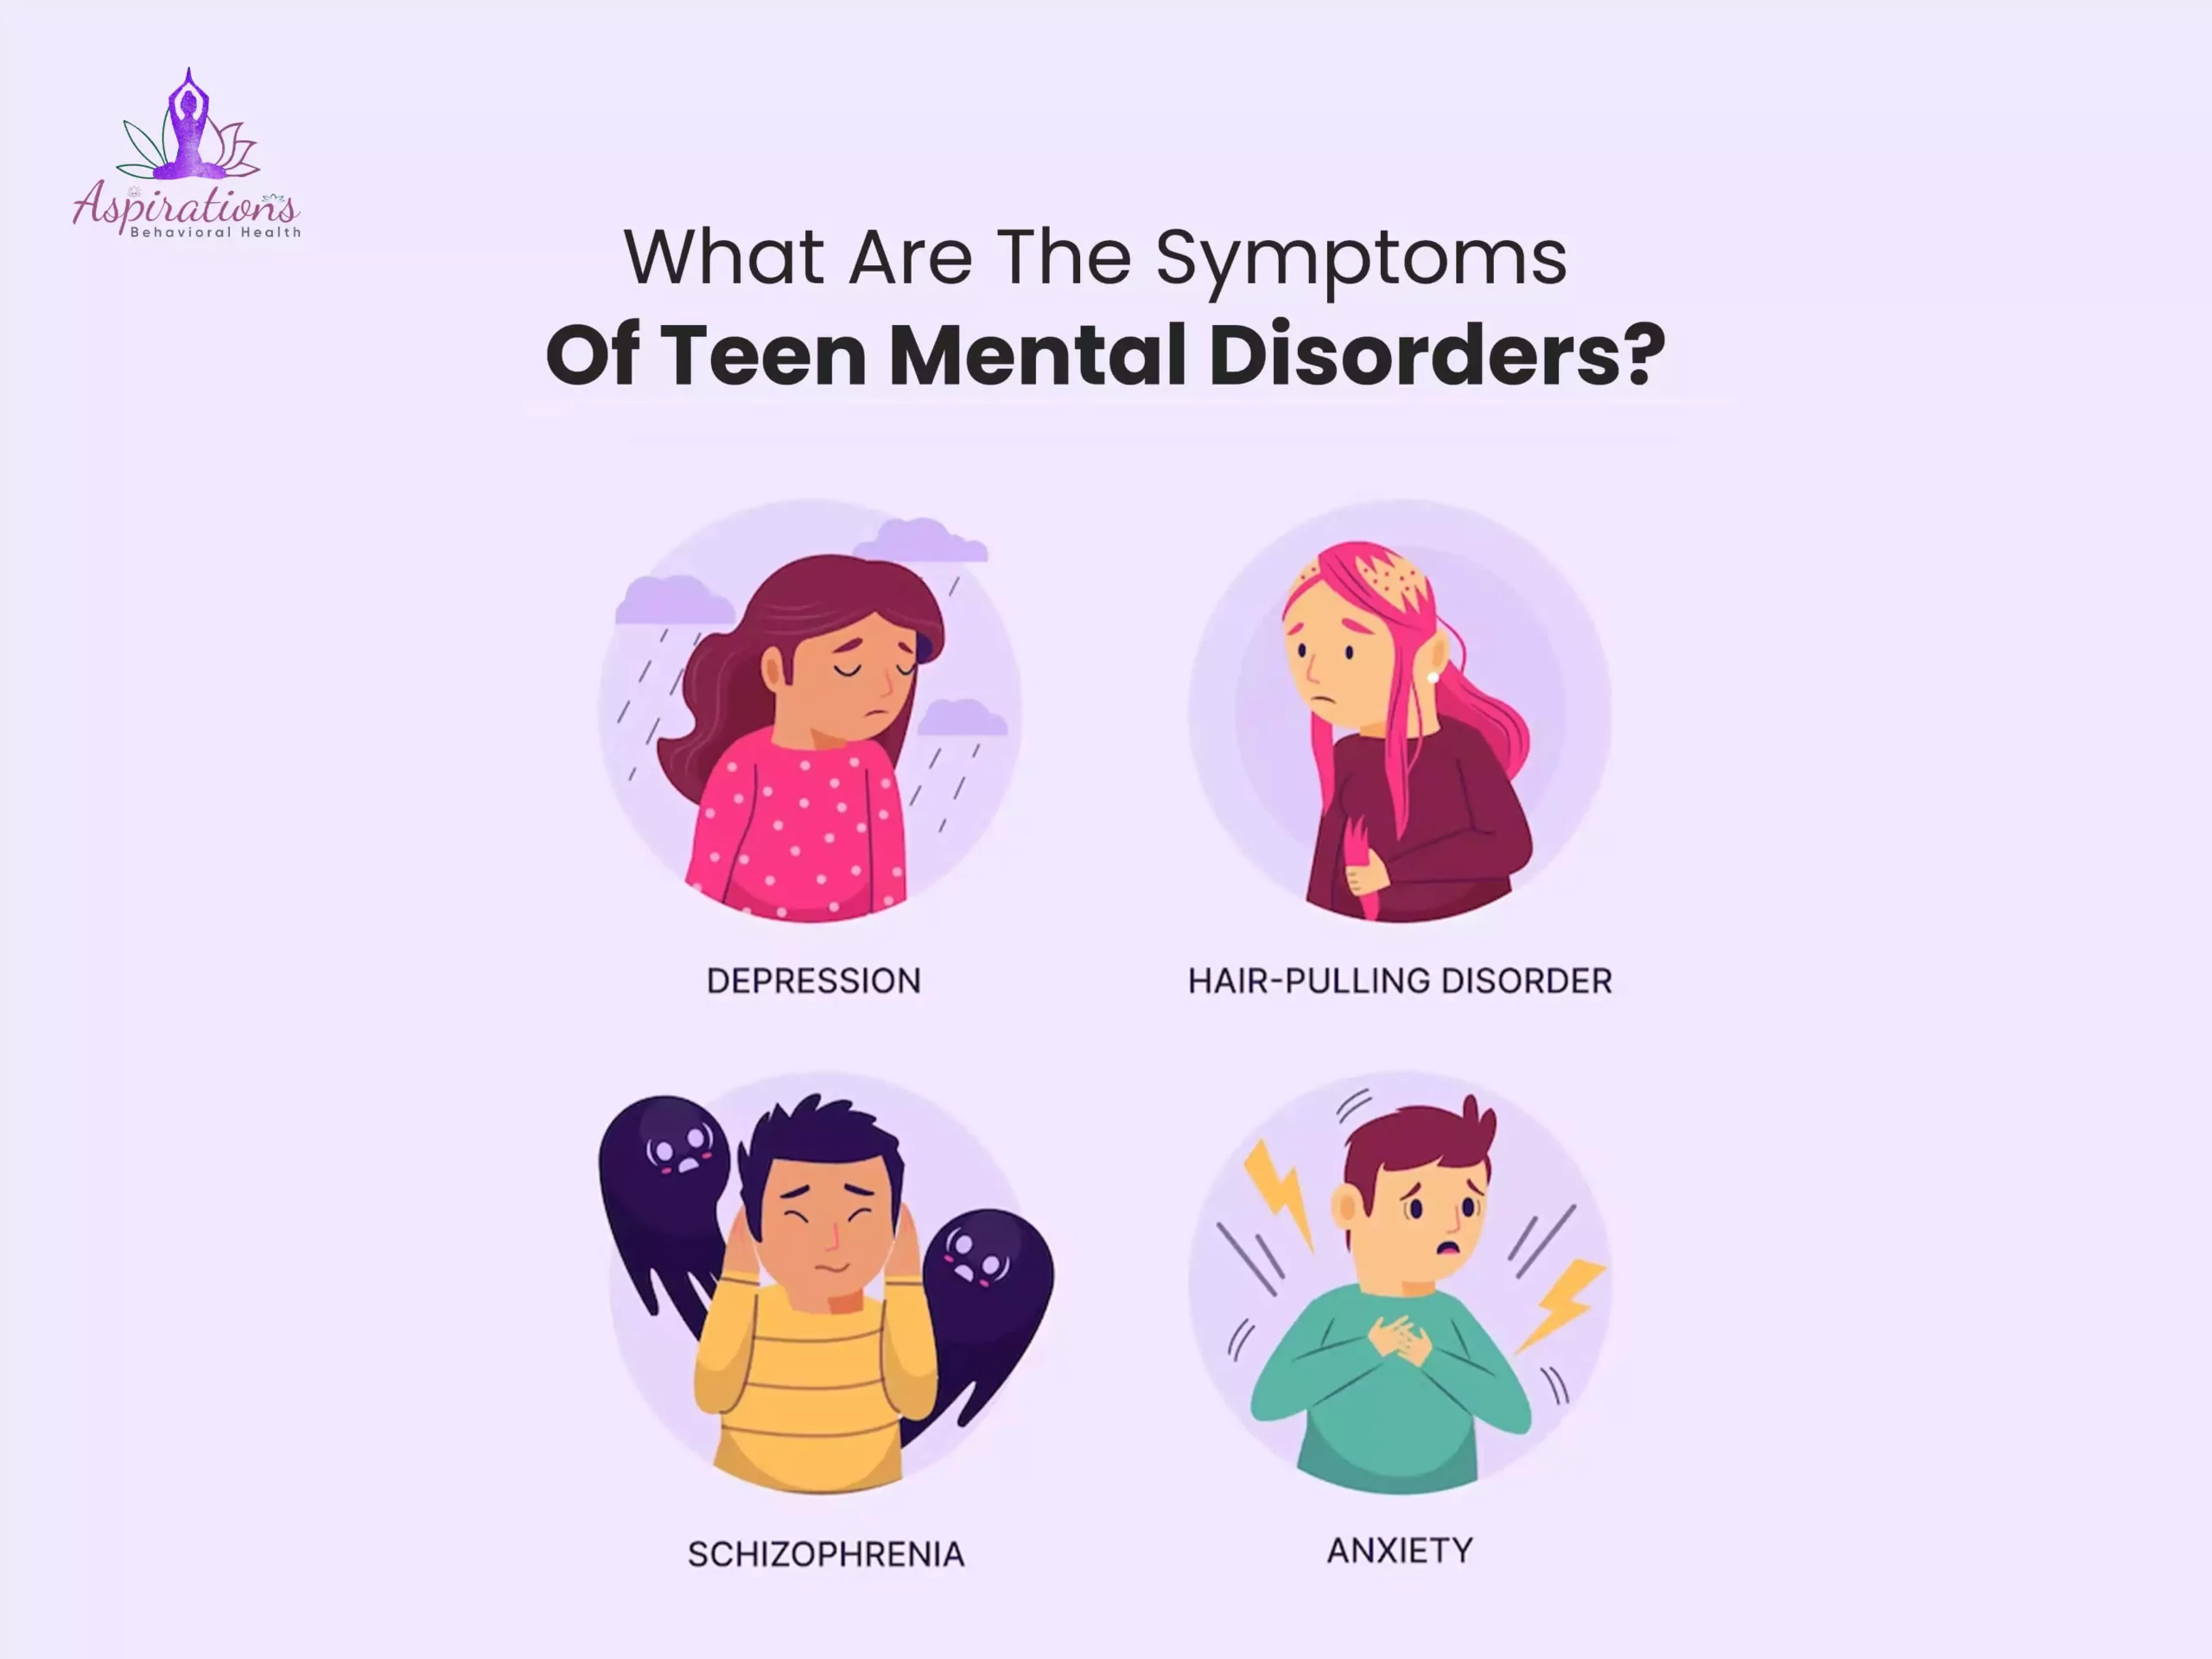 What Are The Symptoms Of Teen Mental Disorders?